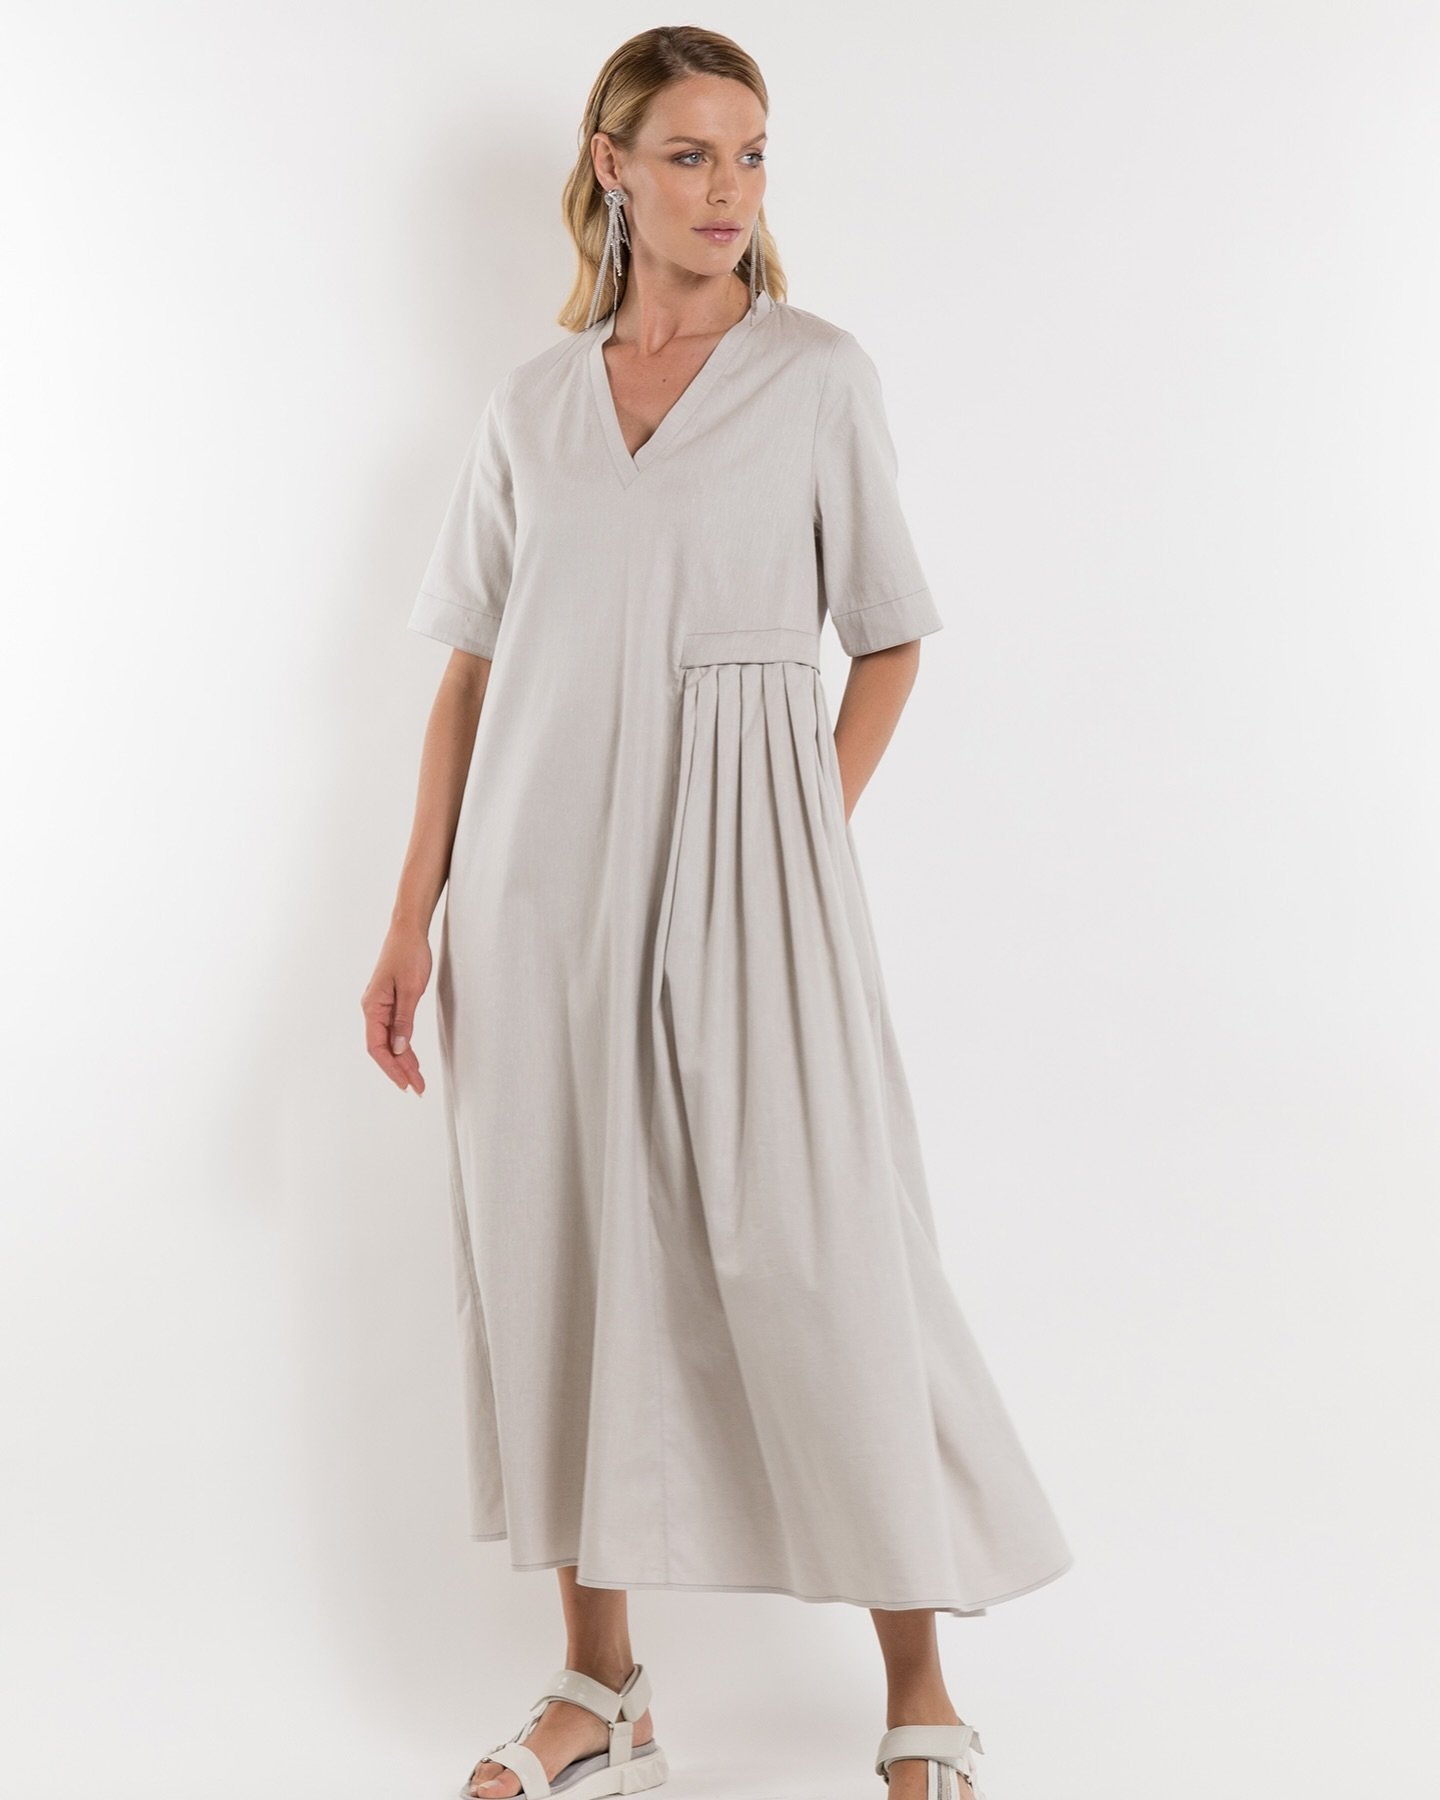 🌟Panicale🌟

Long and flared dress in linen and cotton with short sleeve, a practical and fresh garment and will accompany you in your daily commitments.

🛍️teneroshop.me

📍Podgorica, Njego&scaron;eva 14
📍Budva, TQ Plaza

Duga lepr&scaron;ava hal